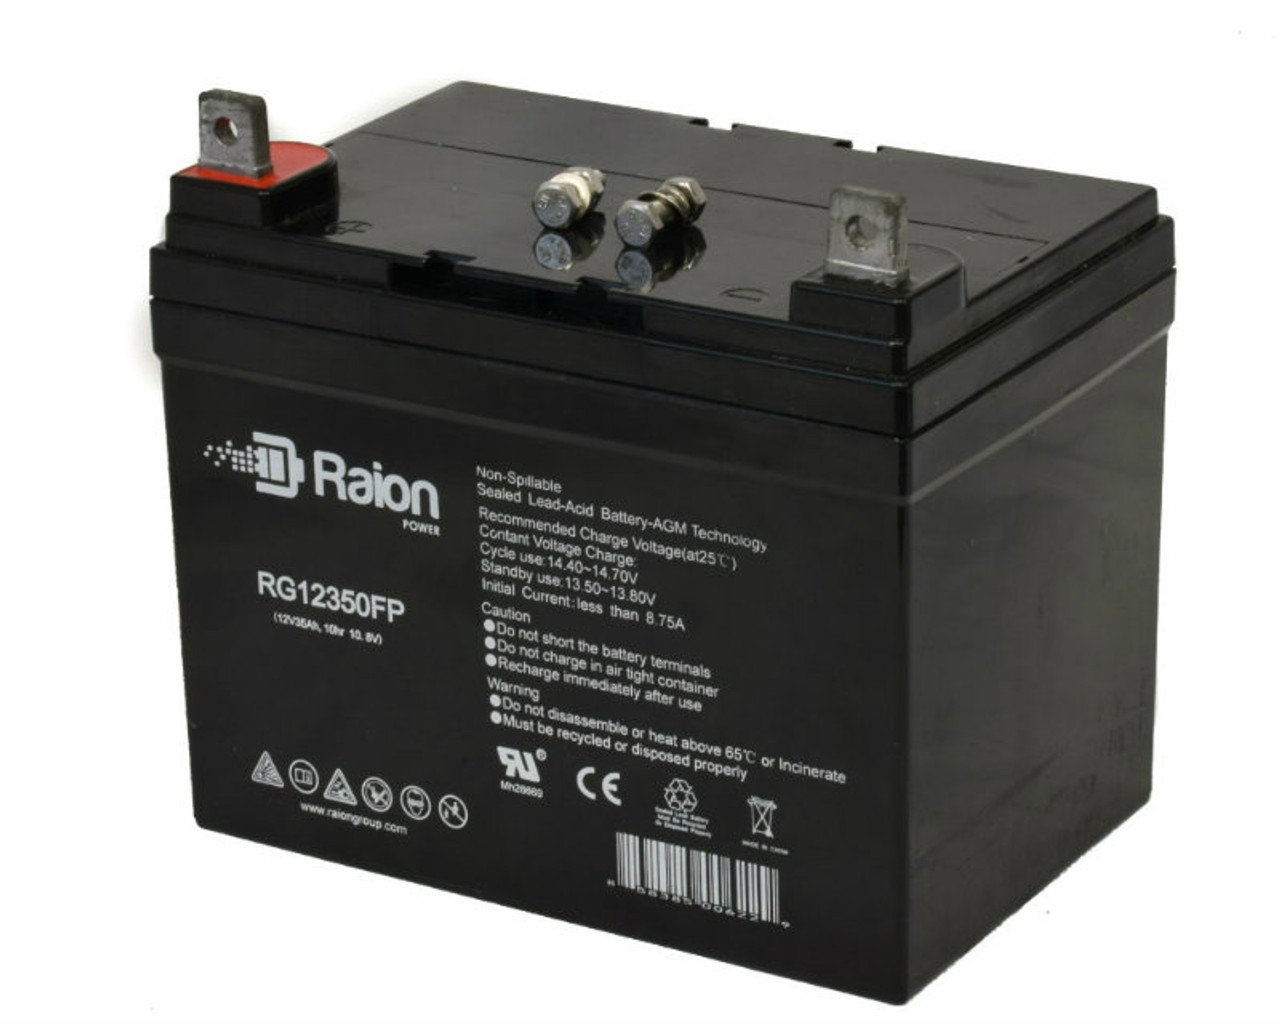 Raion Power Replacement 12V 35Ah RG12350FP Battery for Ihc Cub Garden 1650